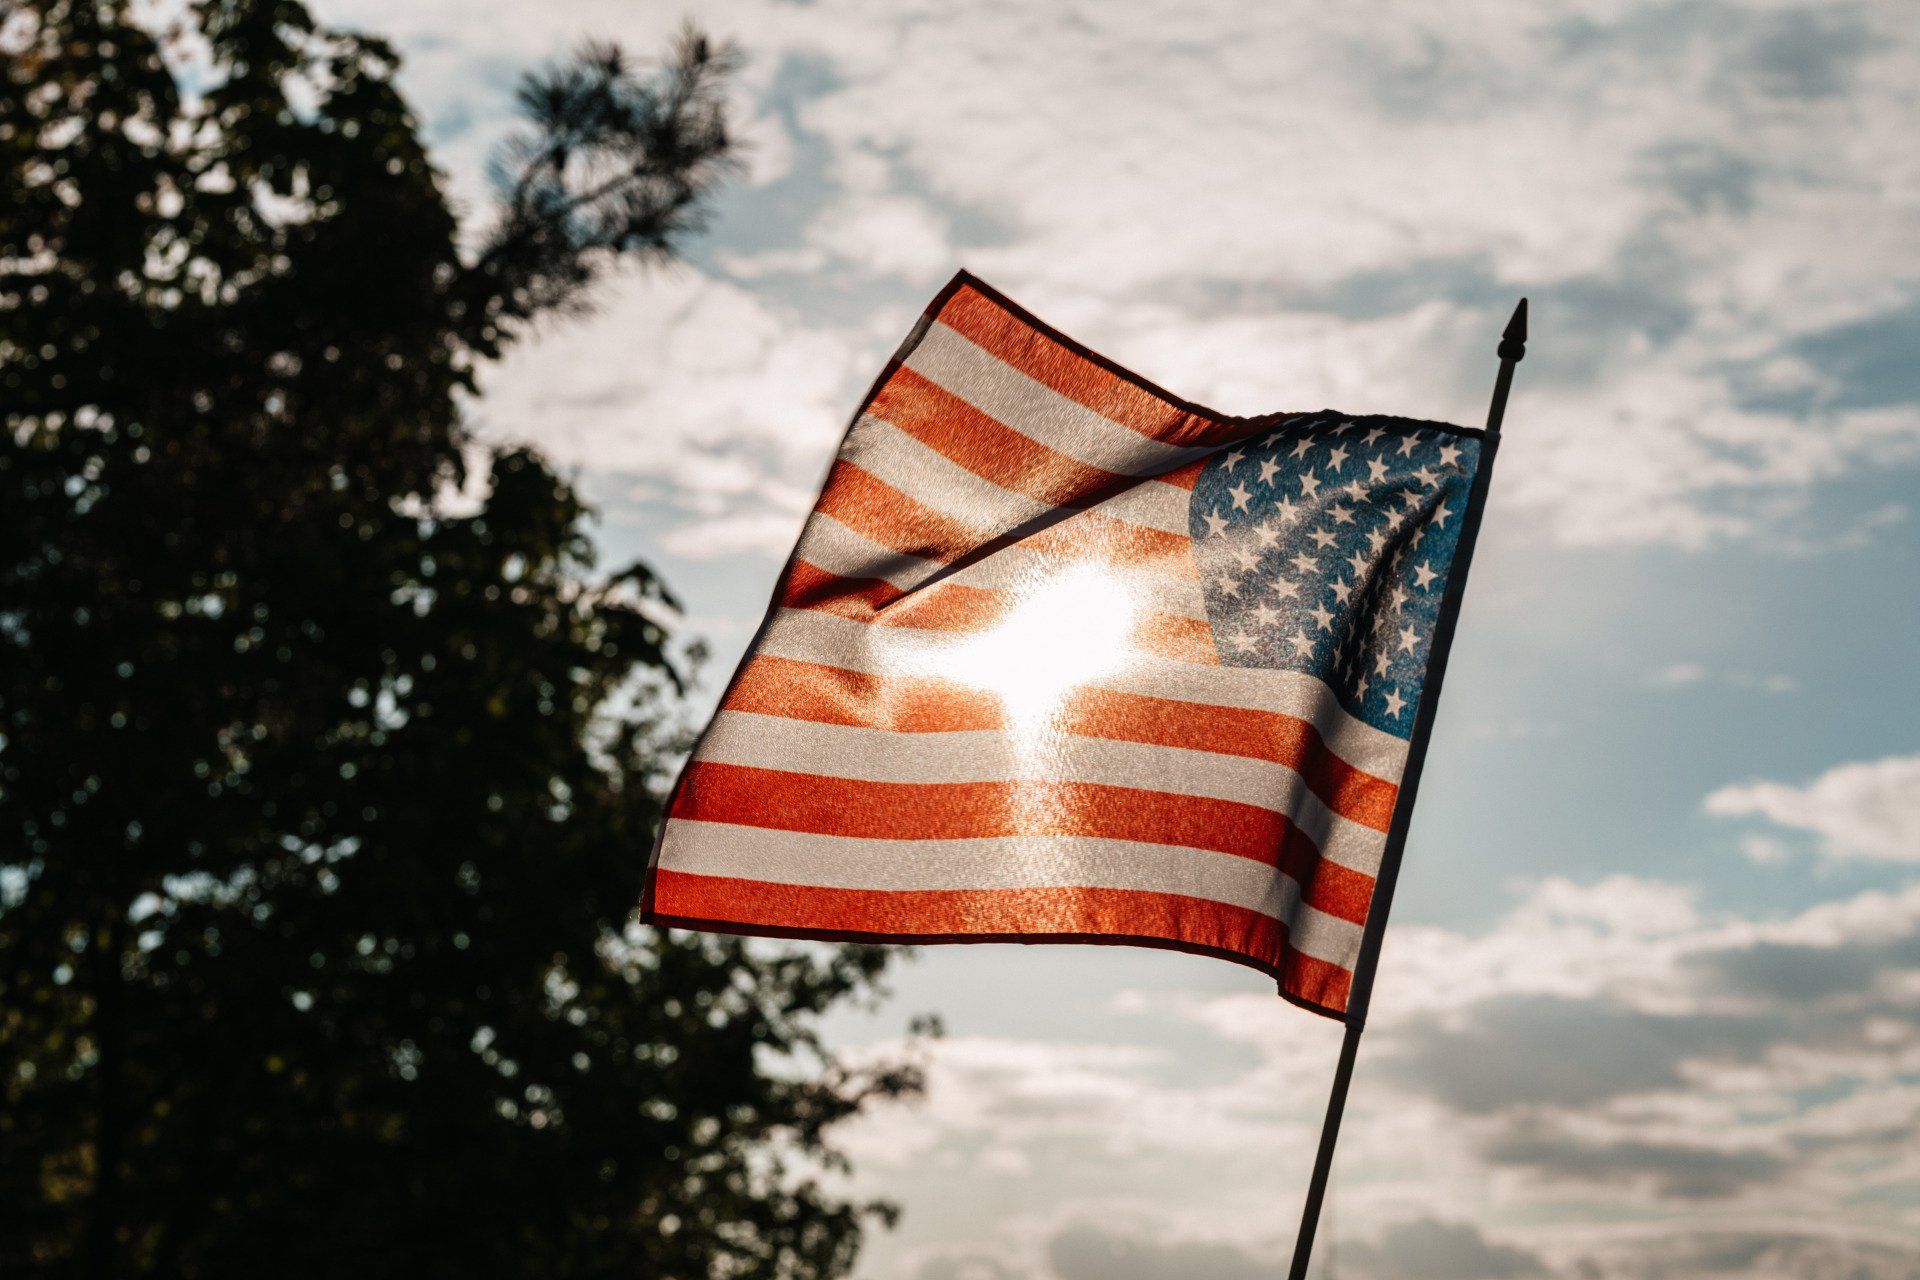 An american flag is waving in the wind with the sun shining through it.